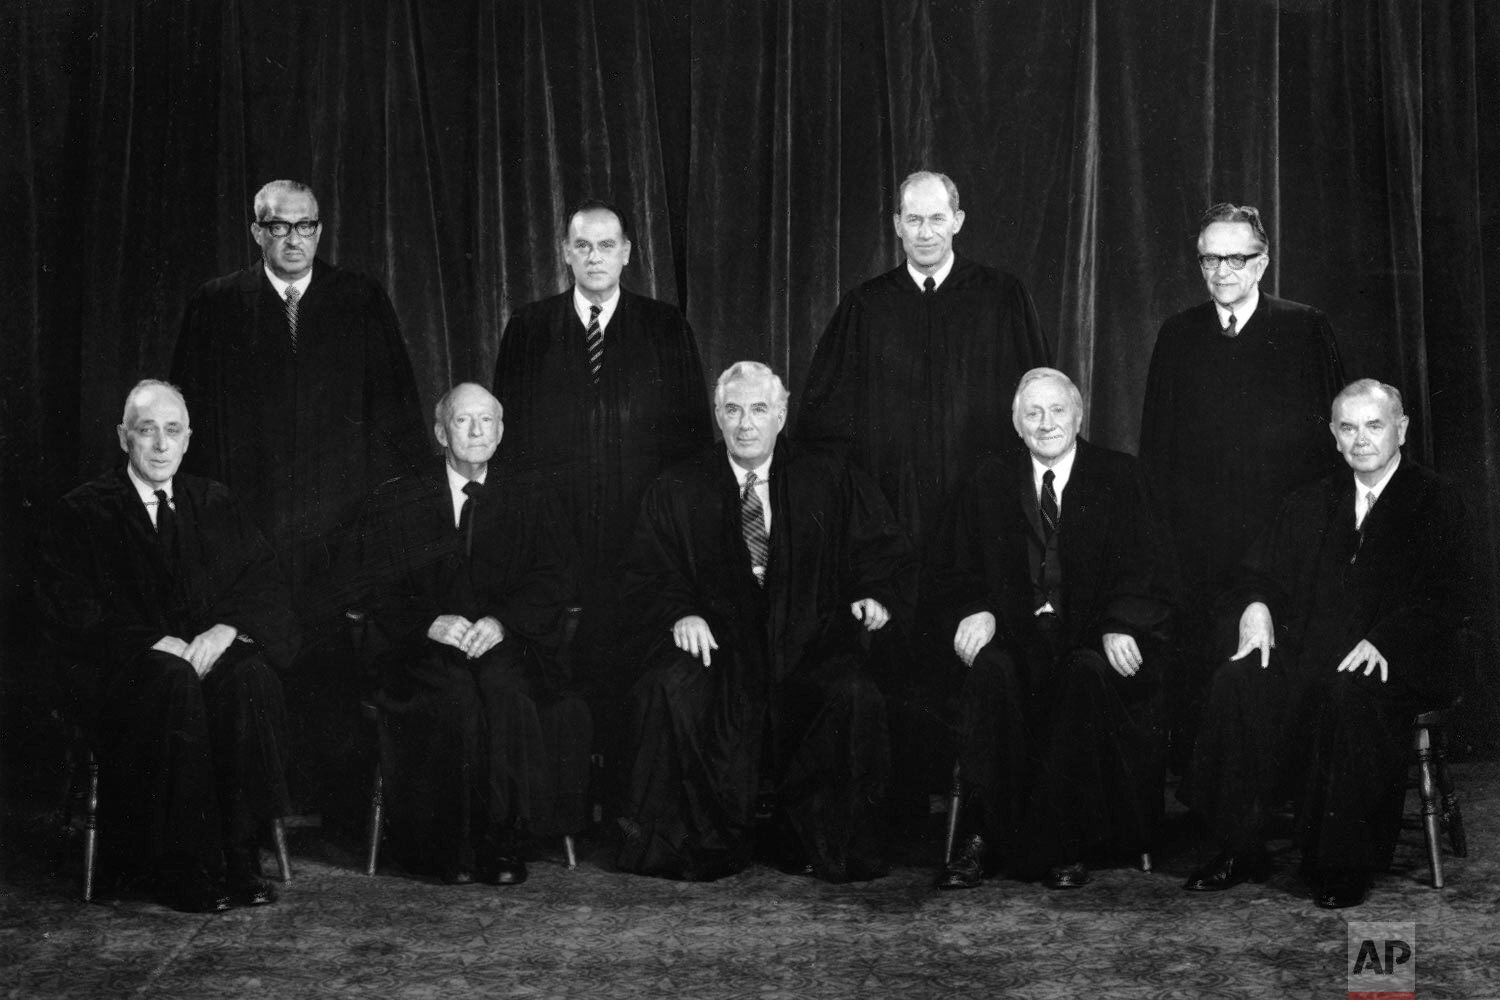  This is a Jan. 1971 photo of members of the U.S. Supreme Court in Washington, D.C.  Seated from left are, Associate Justices John W. Harlan and Hugo Black; Chief Justice Warren E. Burger; Associate Justices William O. Douglas and William Brennan Jr.